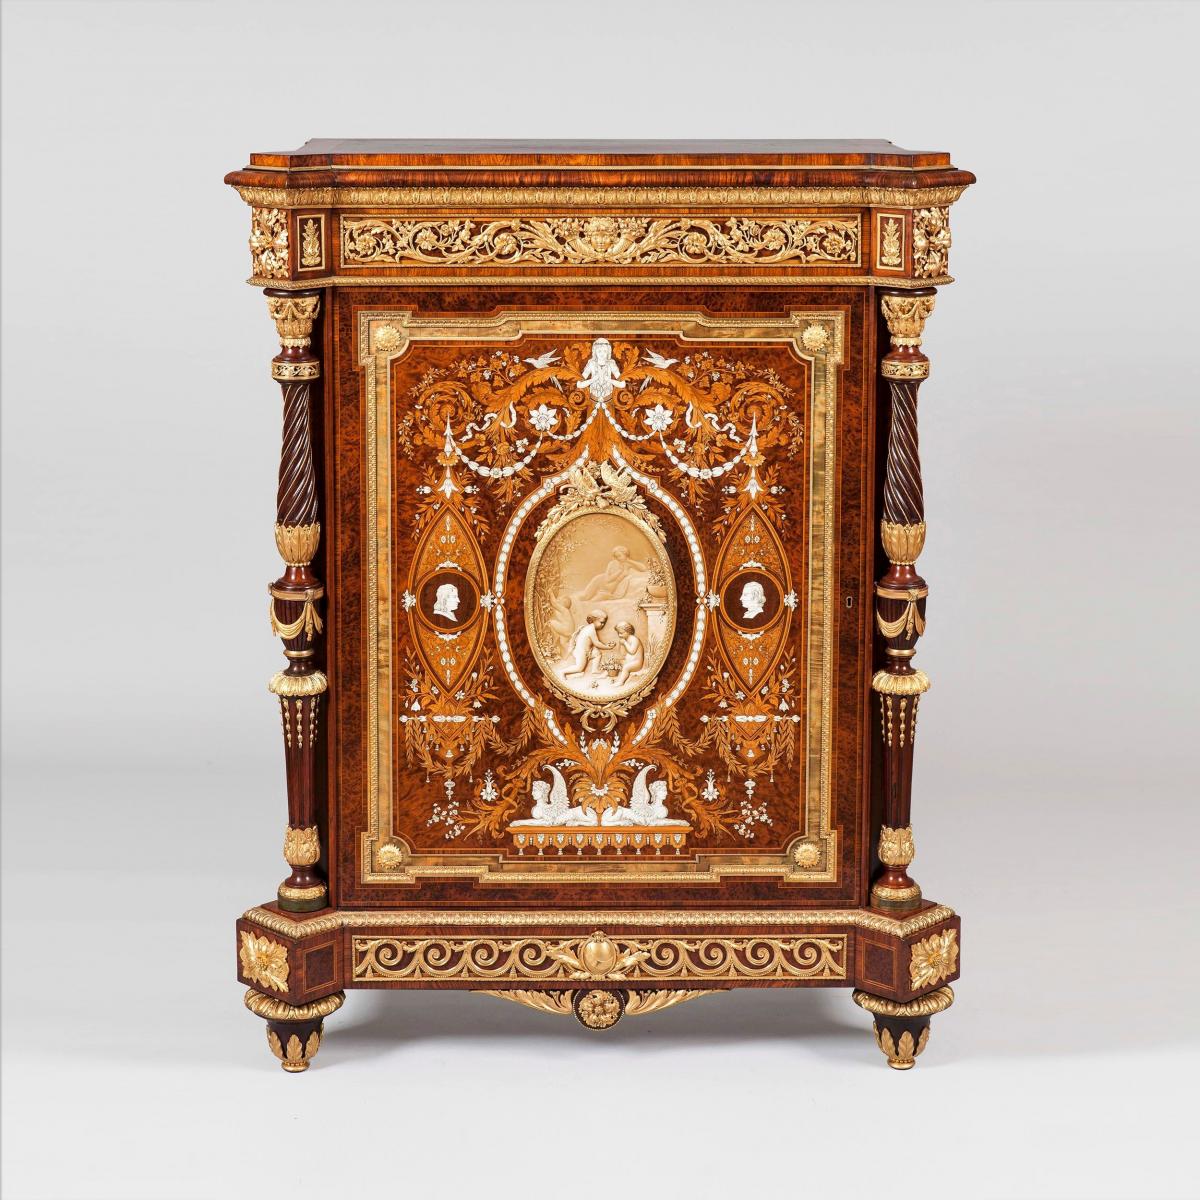 A Royal Cabinet Made for Prince Albert Edward at Marlborough House By Holland & Sons